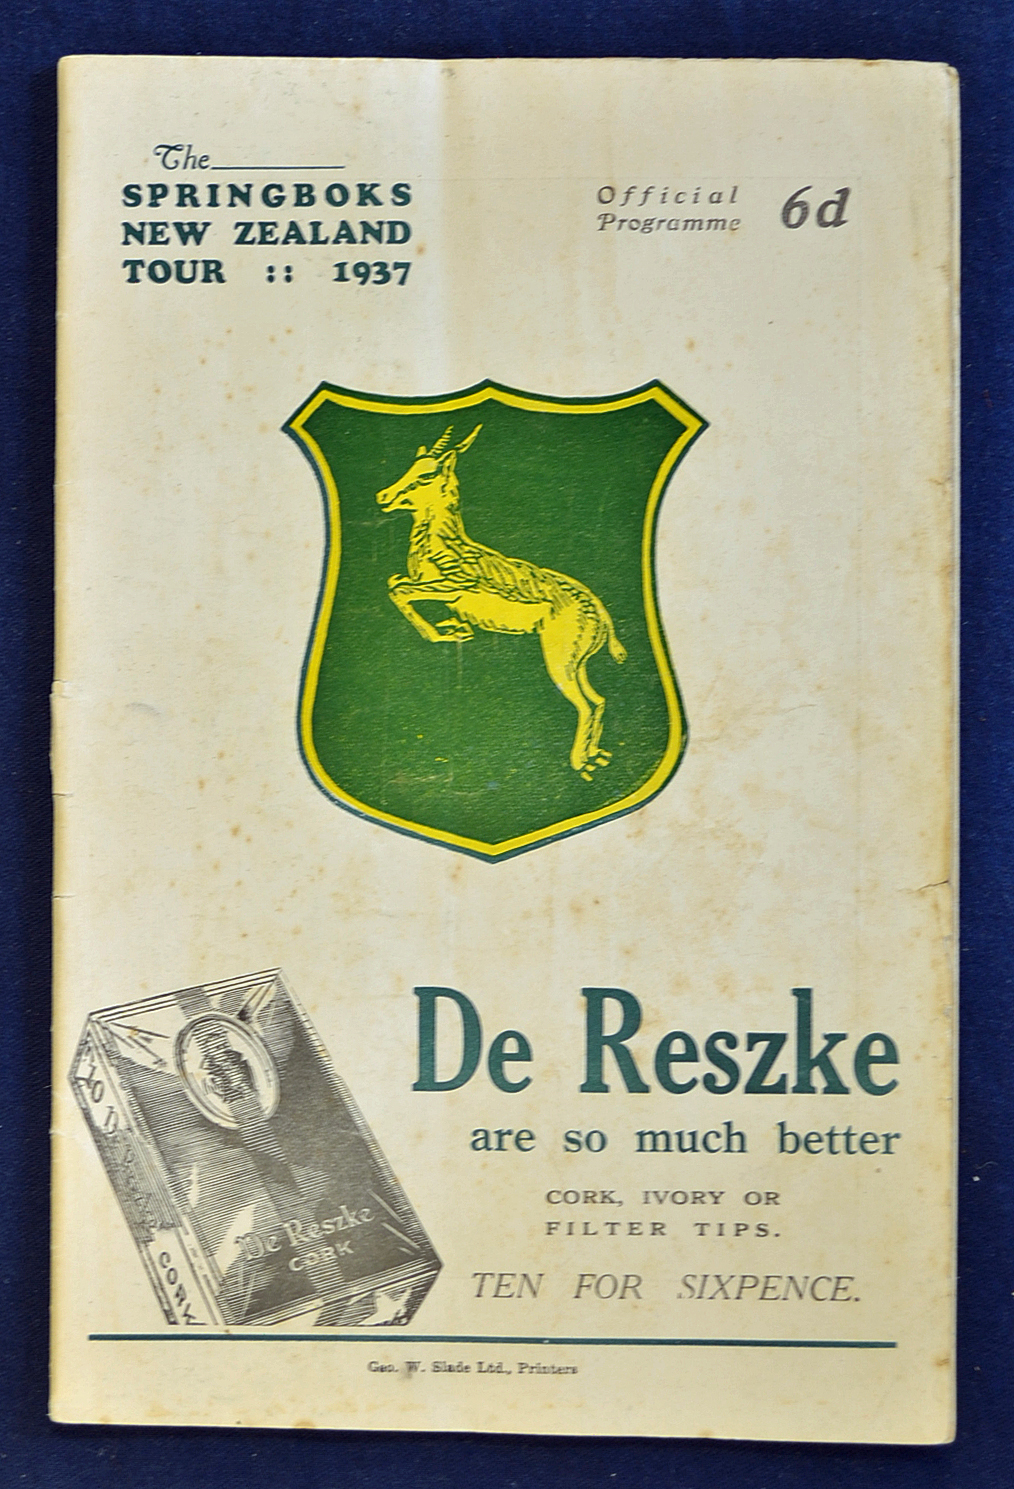 1937 South Africa v Wellington rugby programme - played on 8 August with South Africa winning 29-0 -